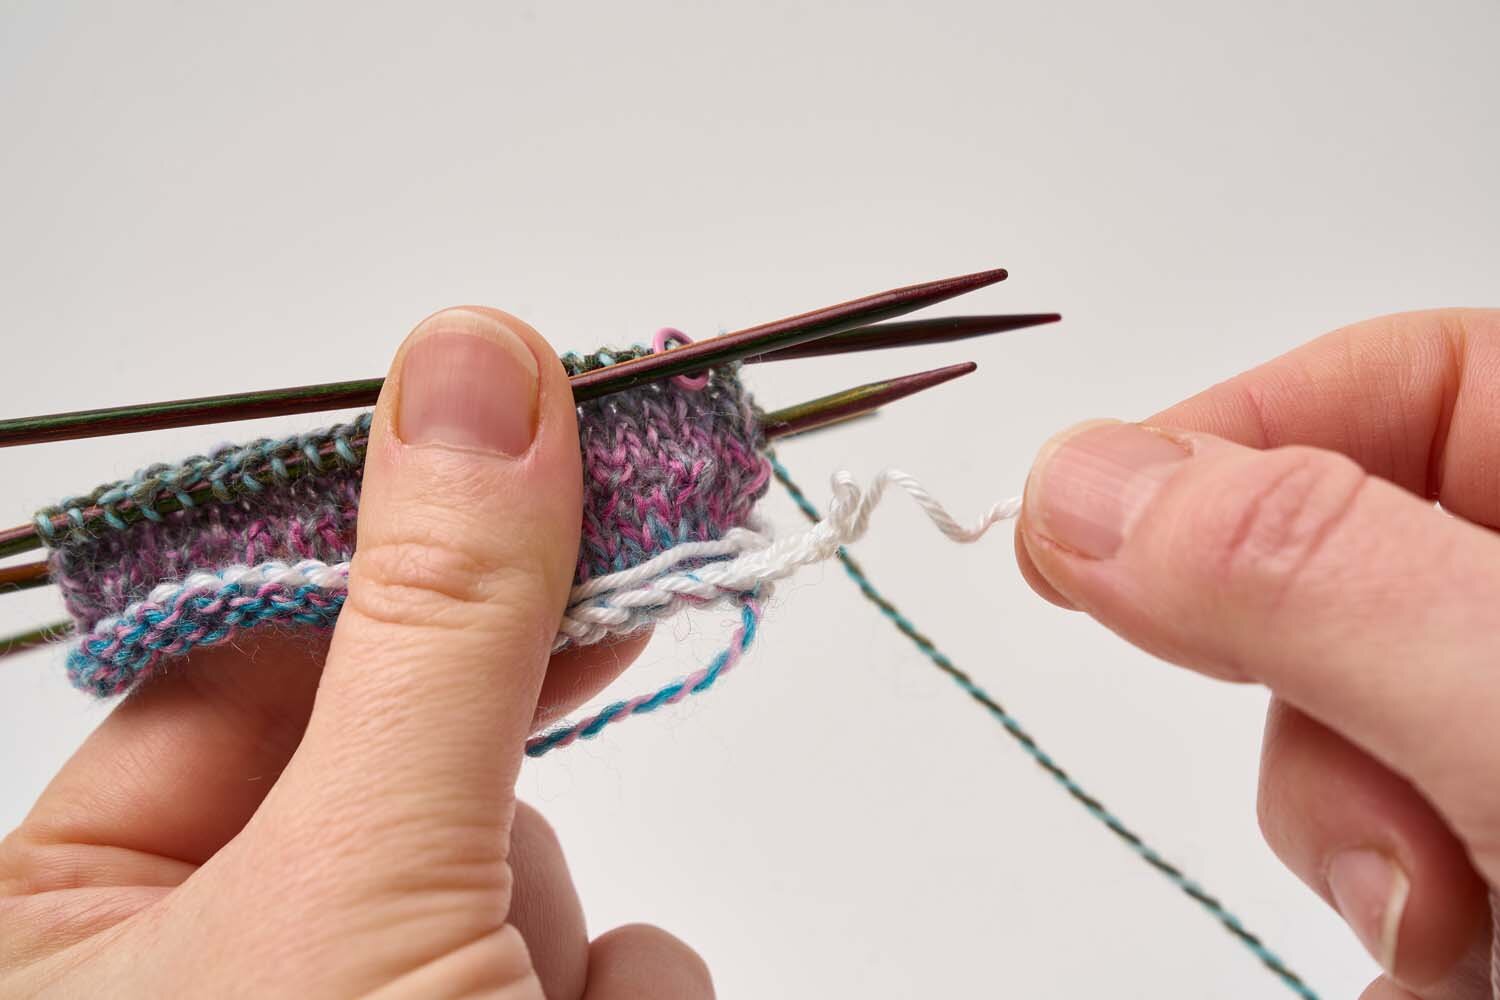 How To Knit A Provisional Cast On